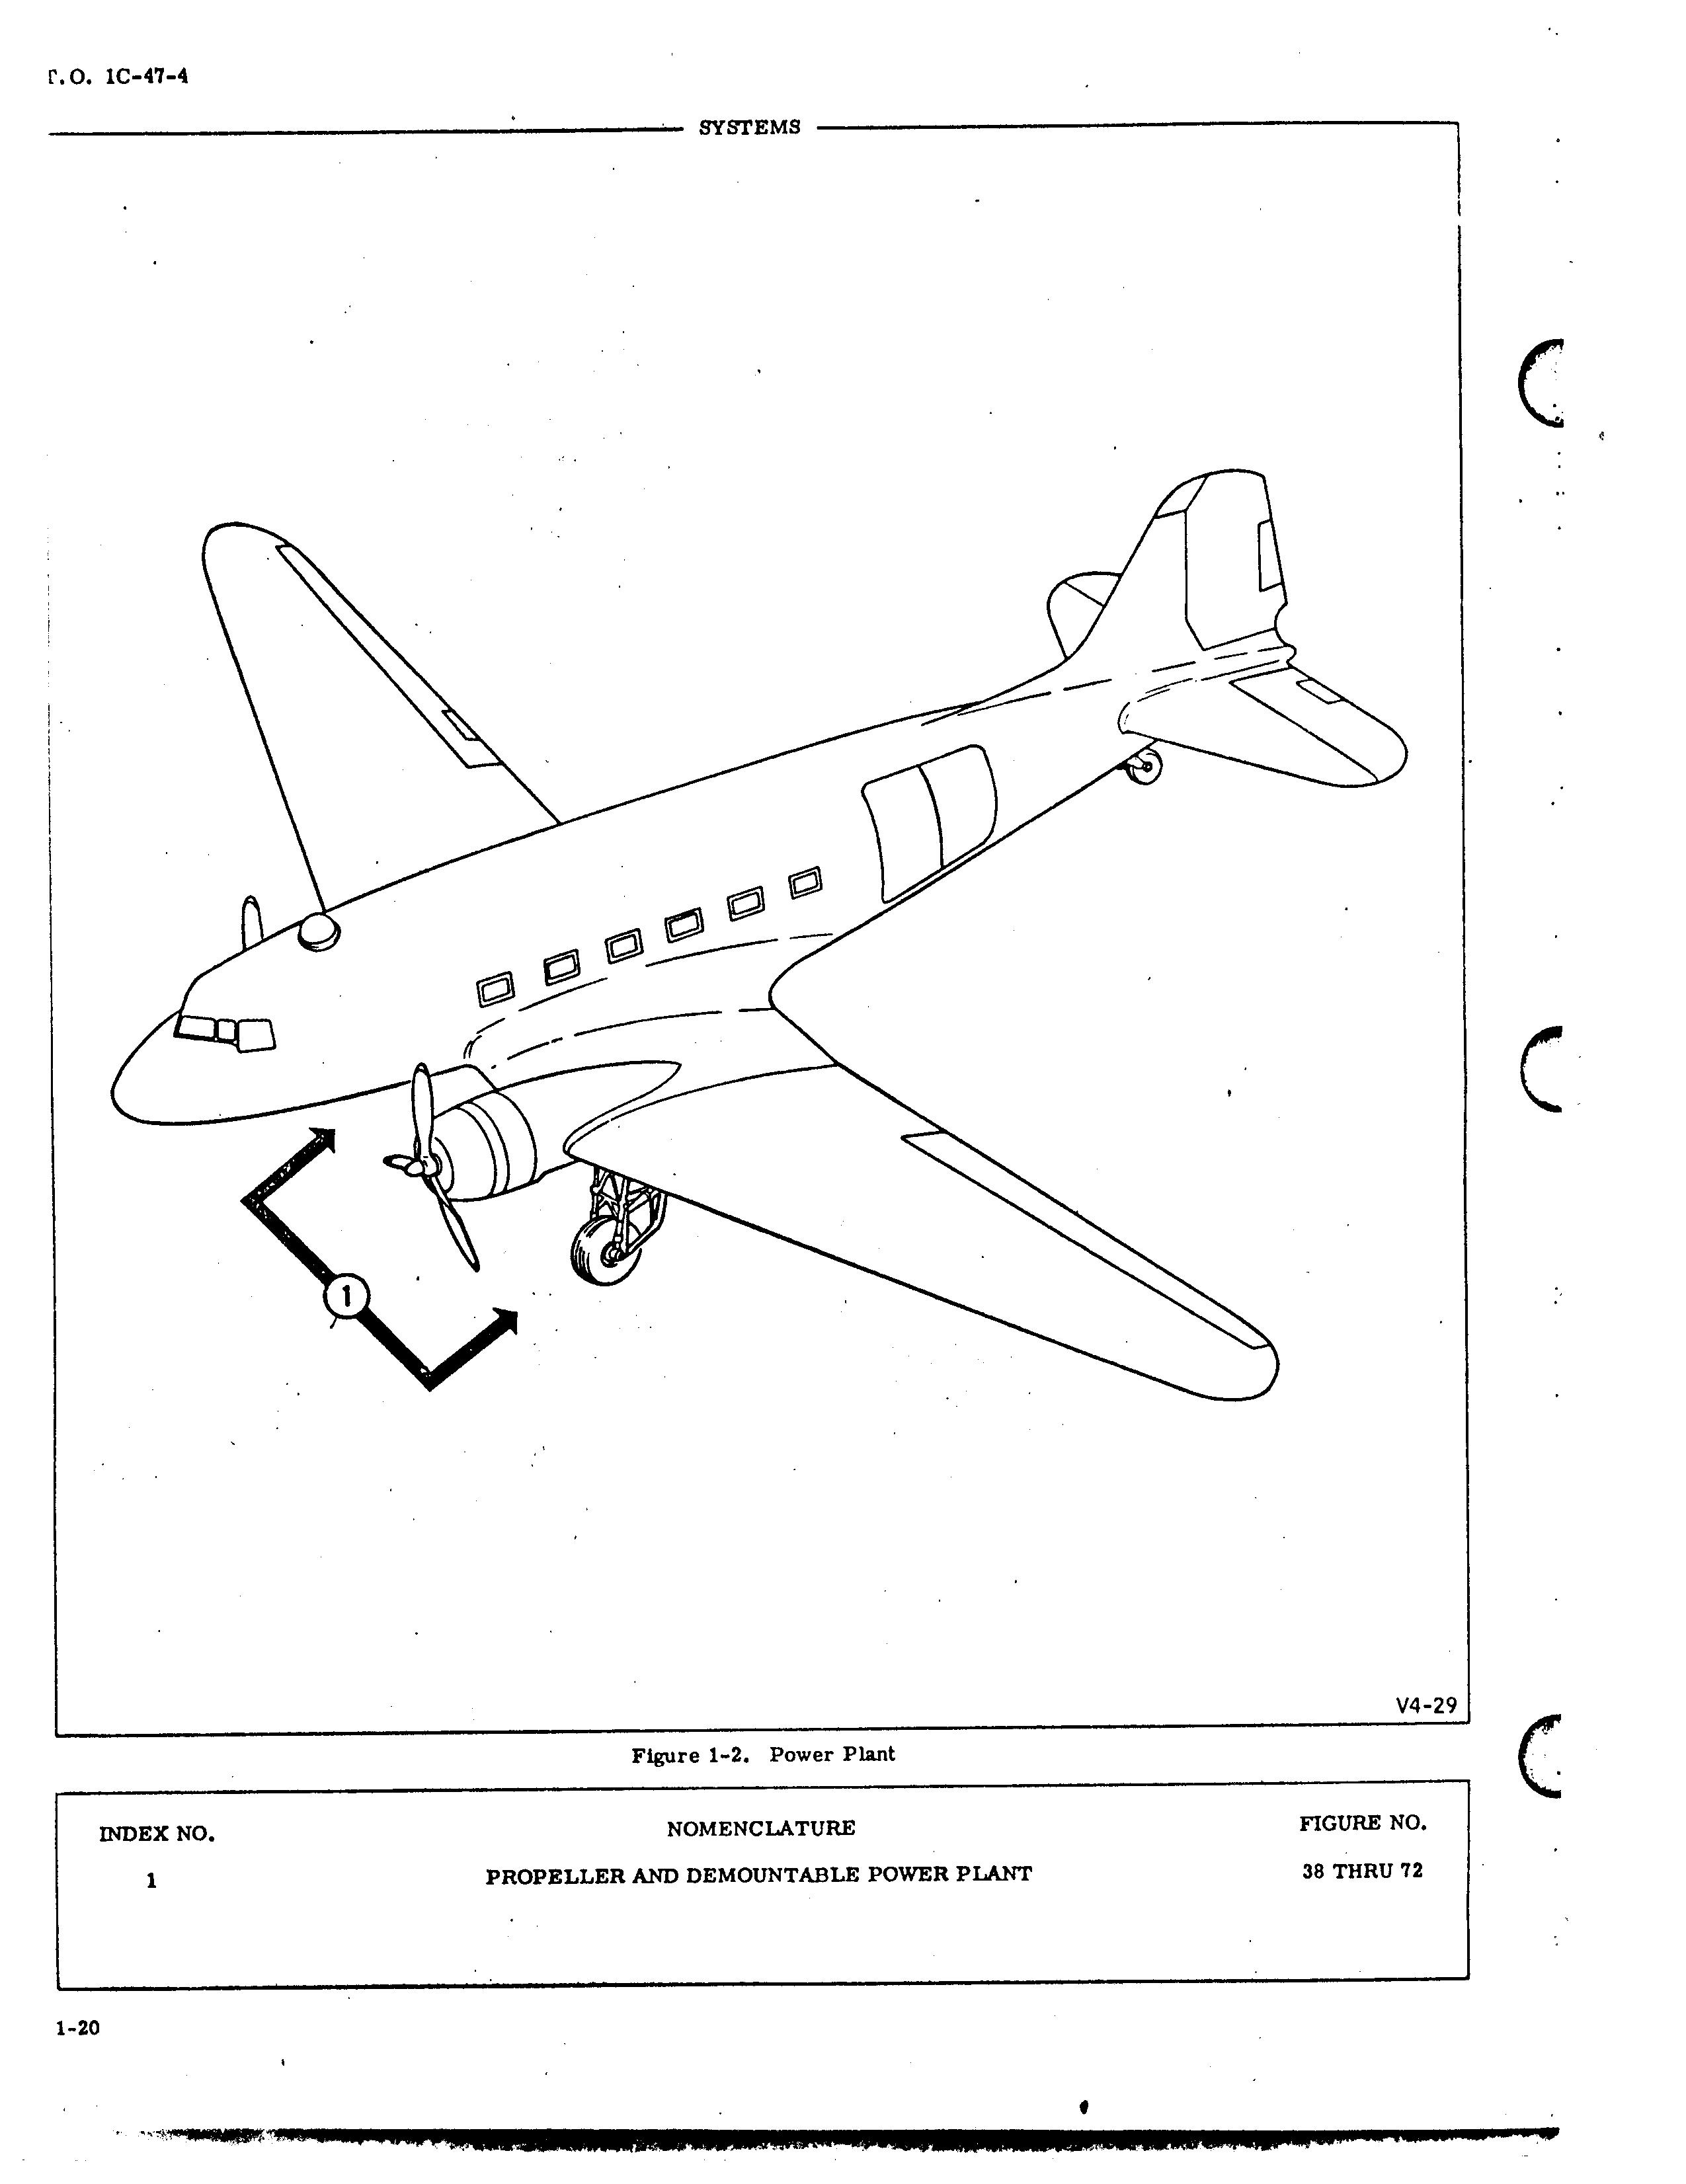 Sample page 34 from AirCorps Library document: Illustrated Parts Breakdown for C-47A, C-47B, C-47D, C-117A, and C-117B